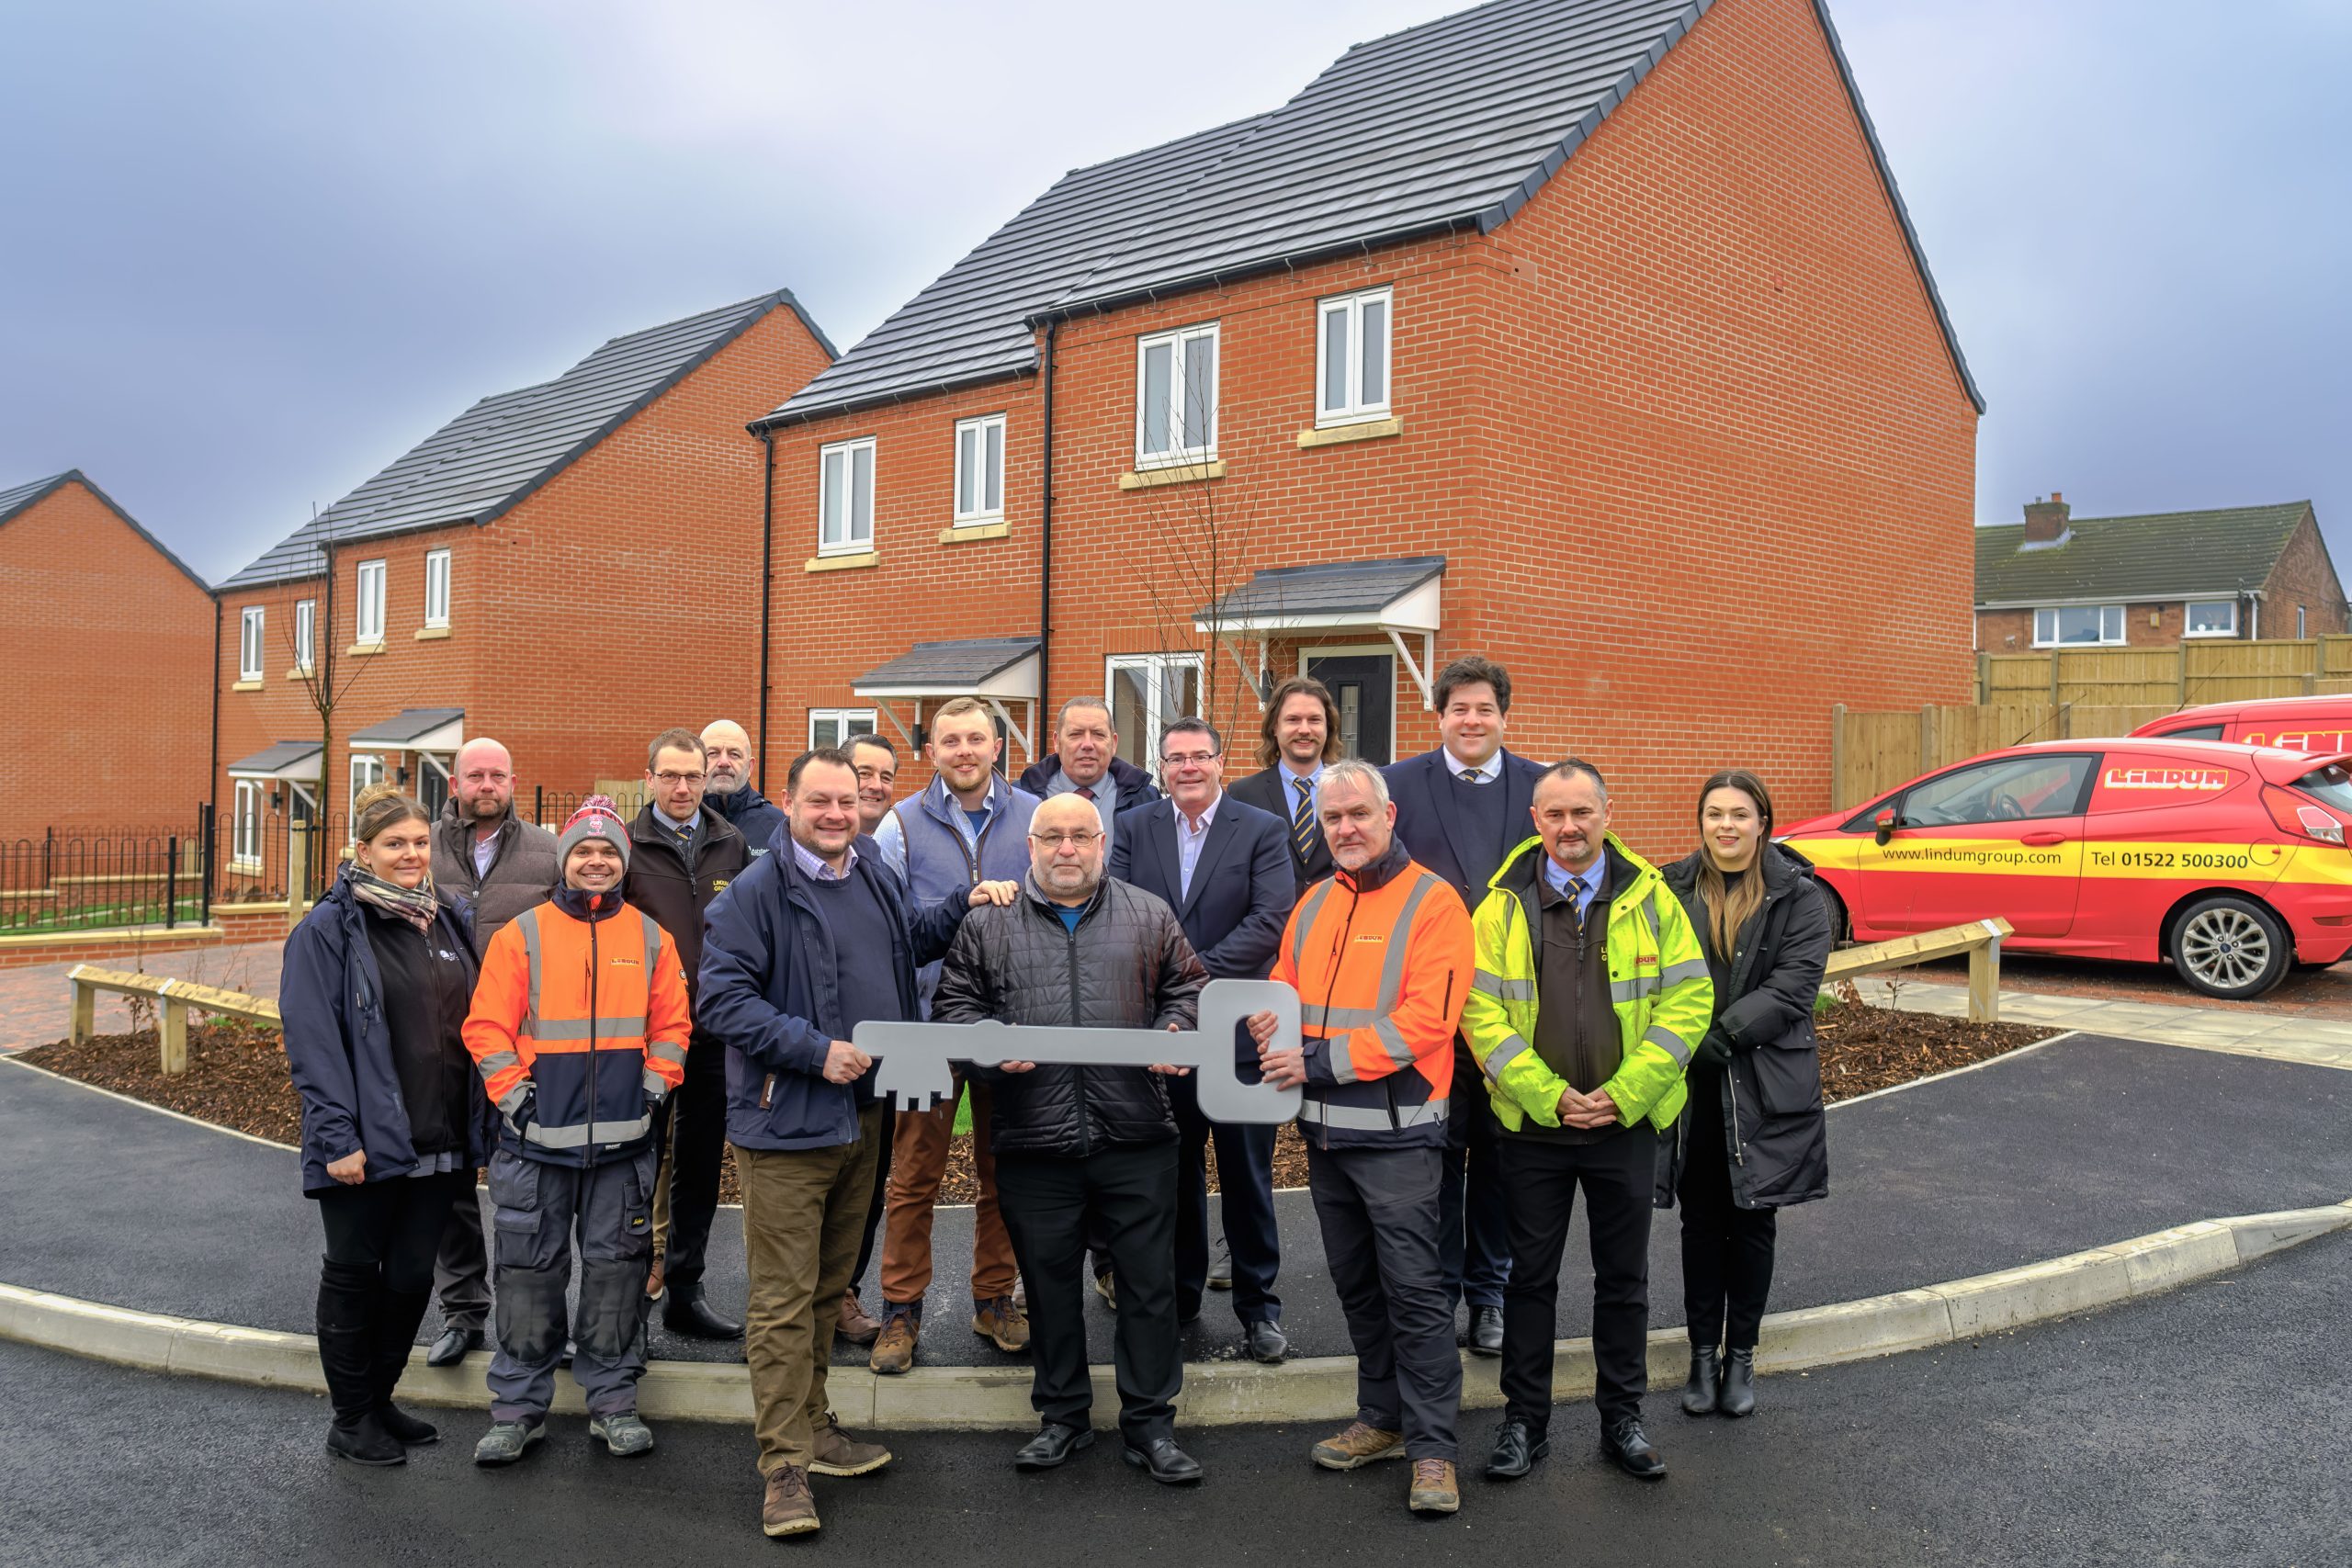 Lindum Group hands over keys to latest housing development to Ashfield District Council